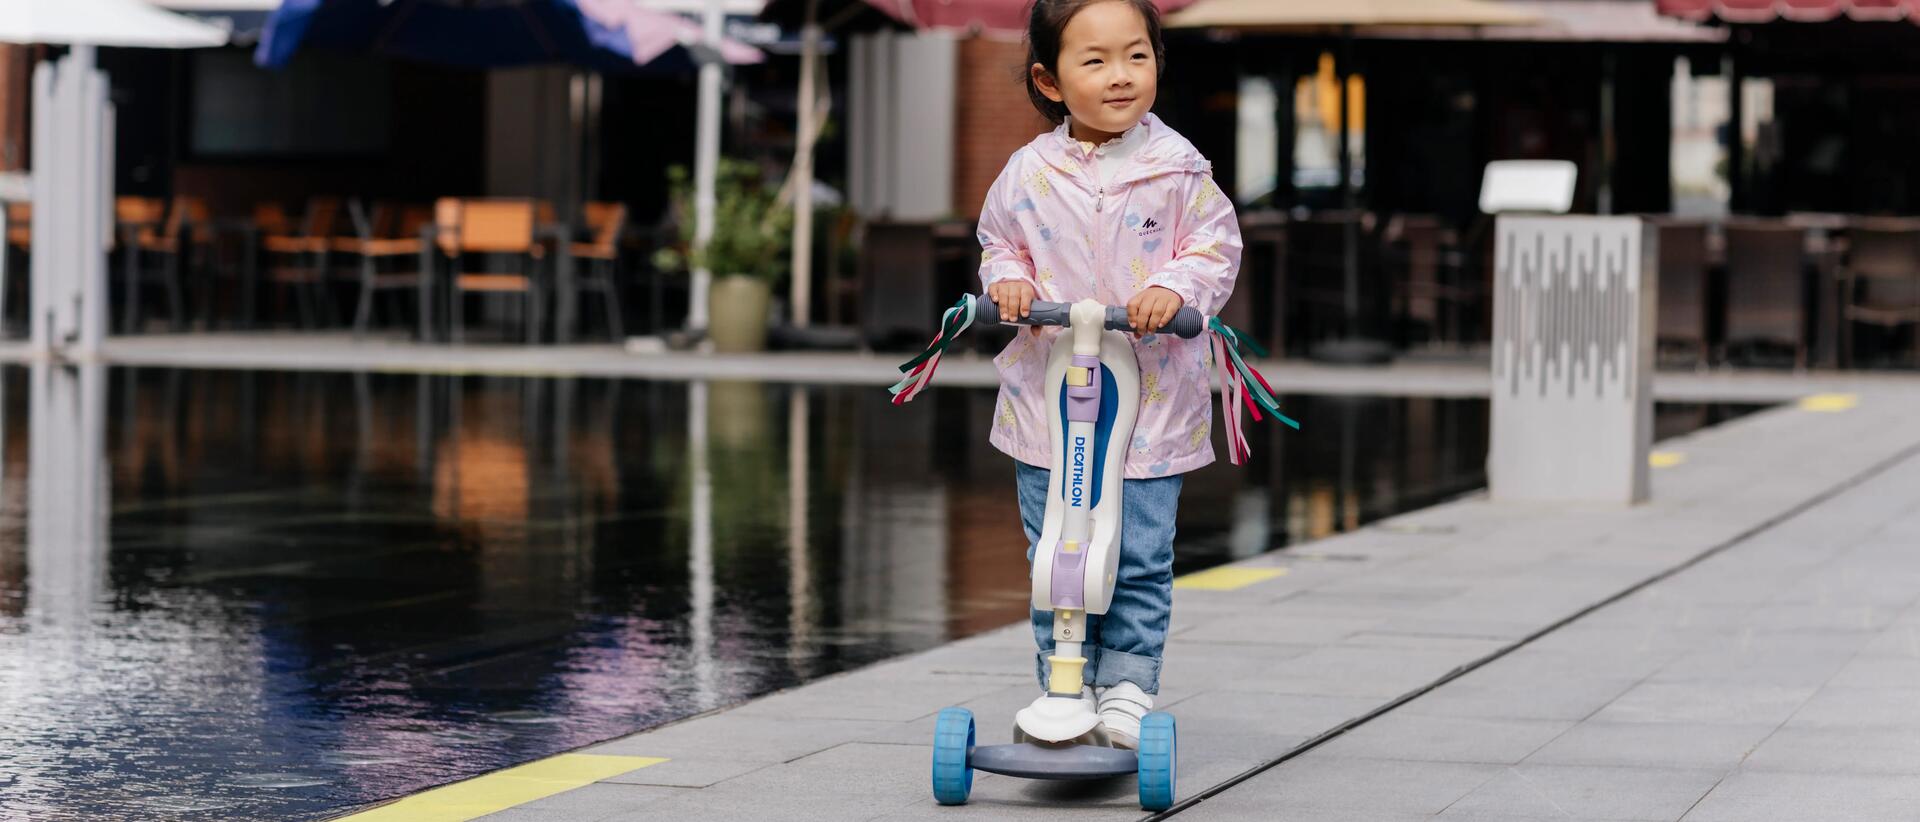 Young girl riding Decathlon Scooter outside.